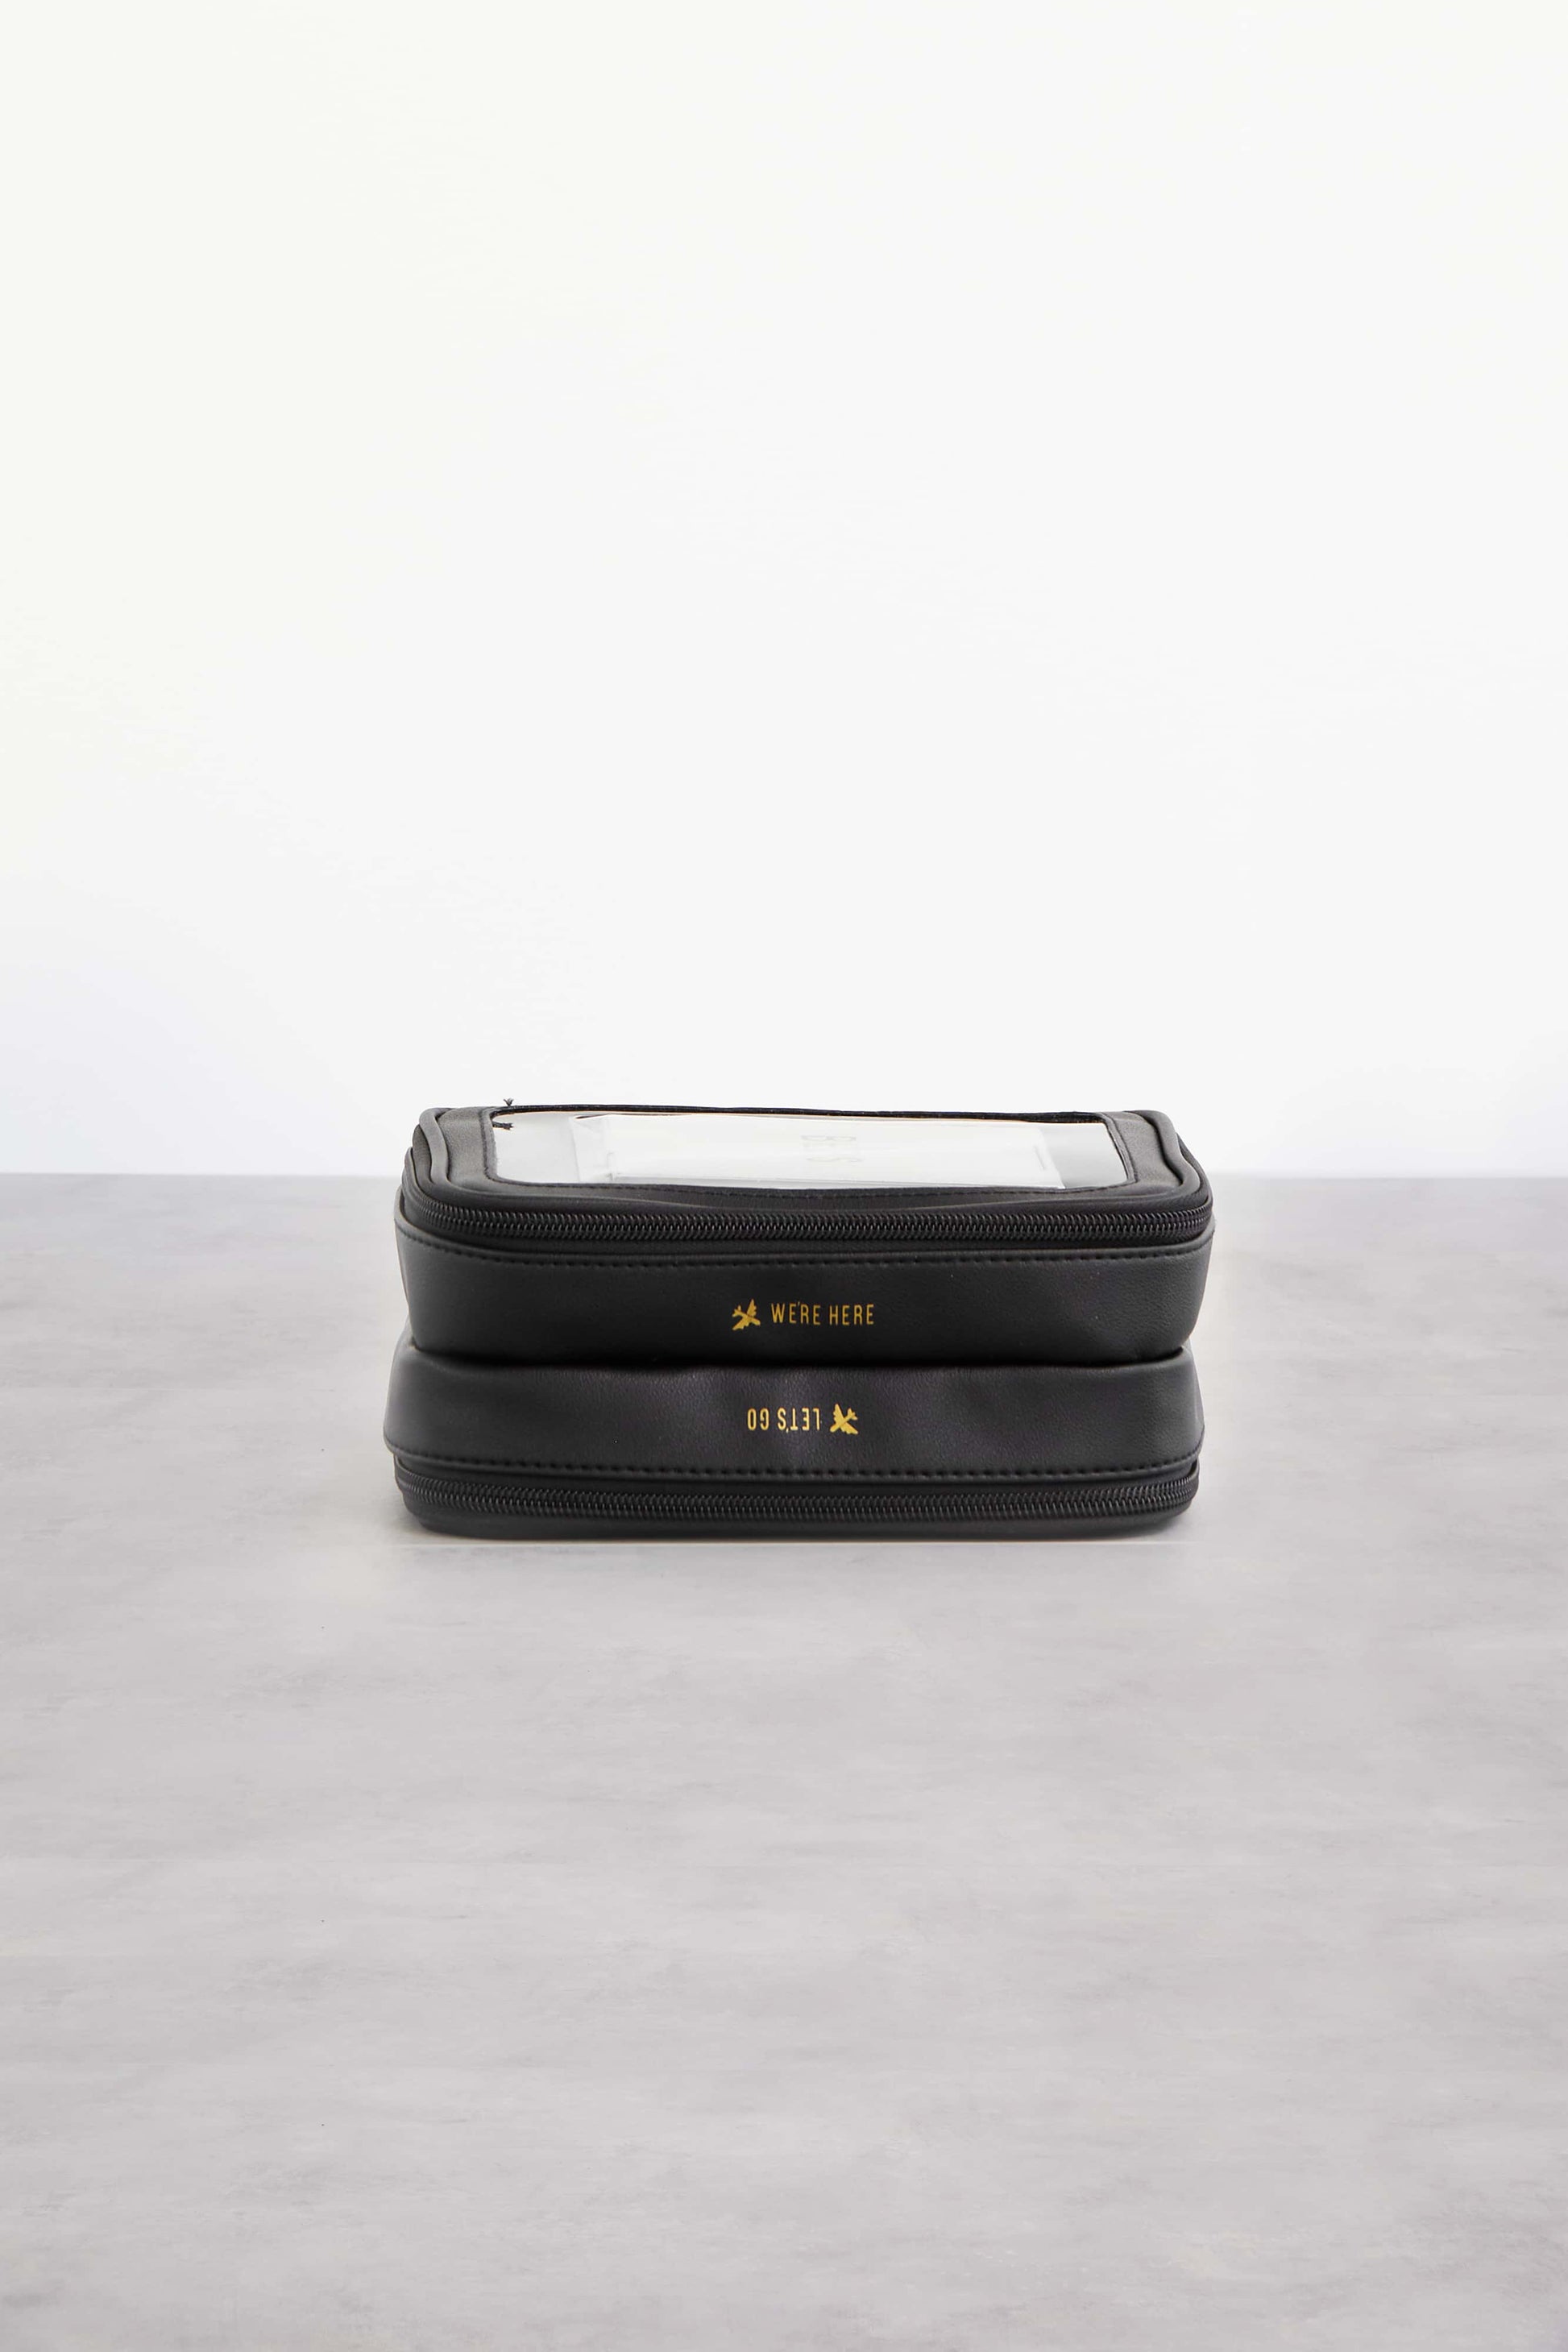 On The Go Essential Case in Black Laying on its Side Bottom Showing